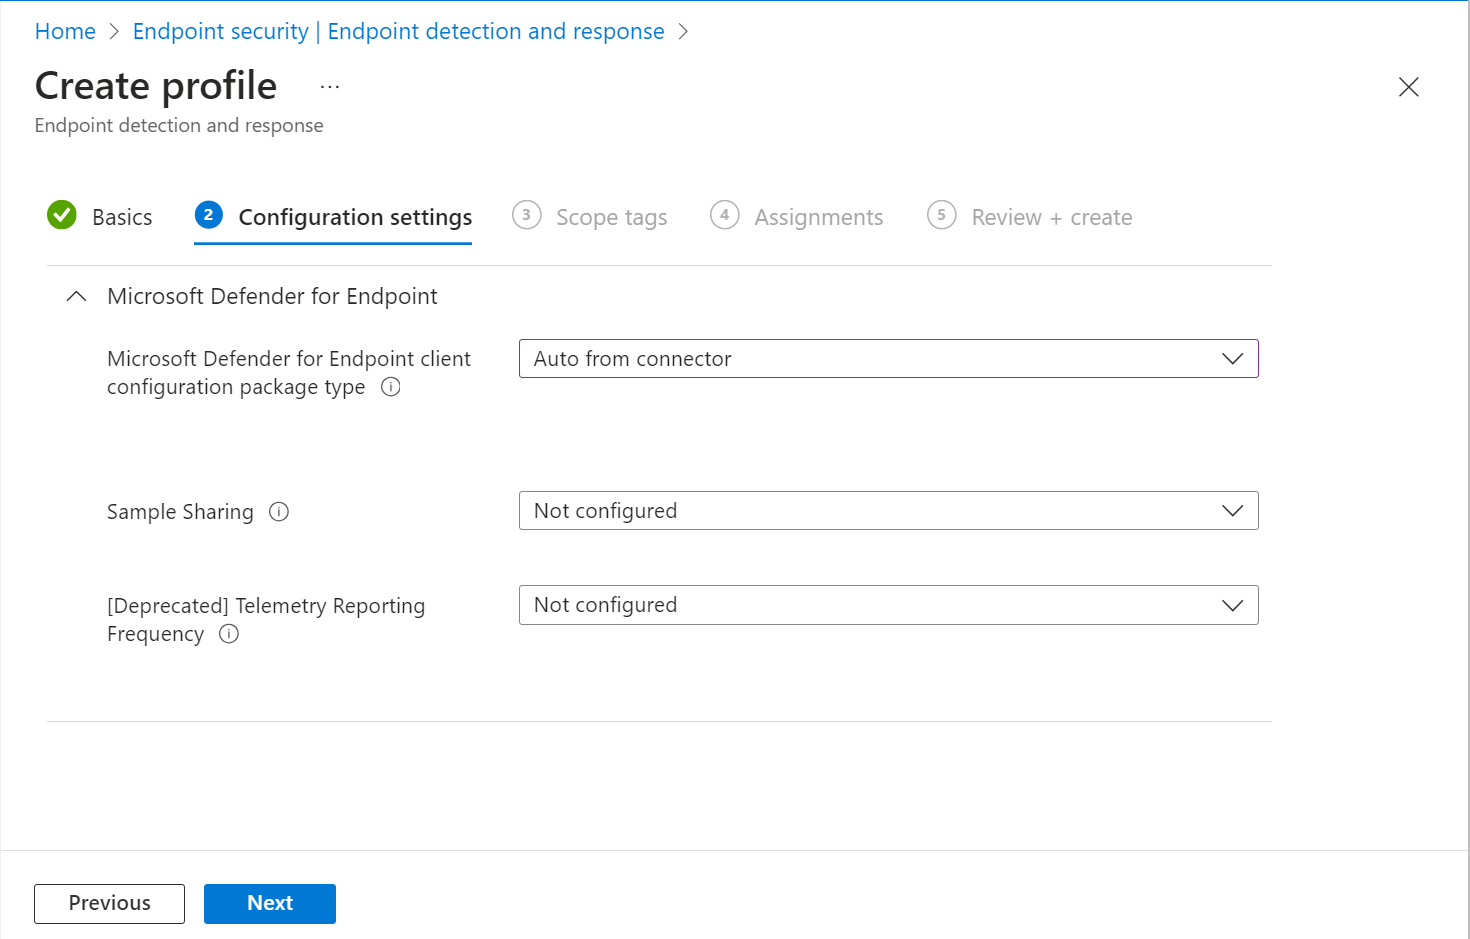 Screen shot of the configuration options for Endpoint Detection and Response.